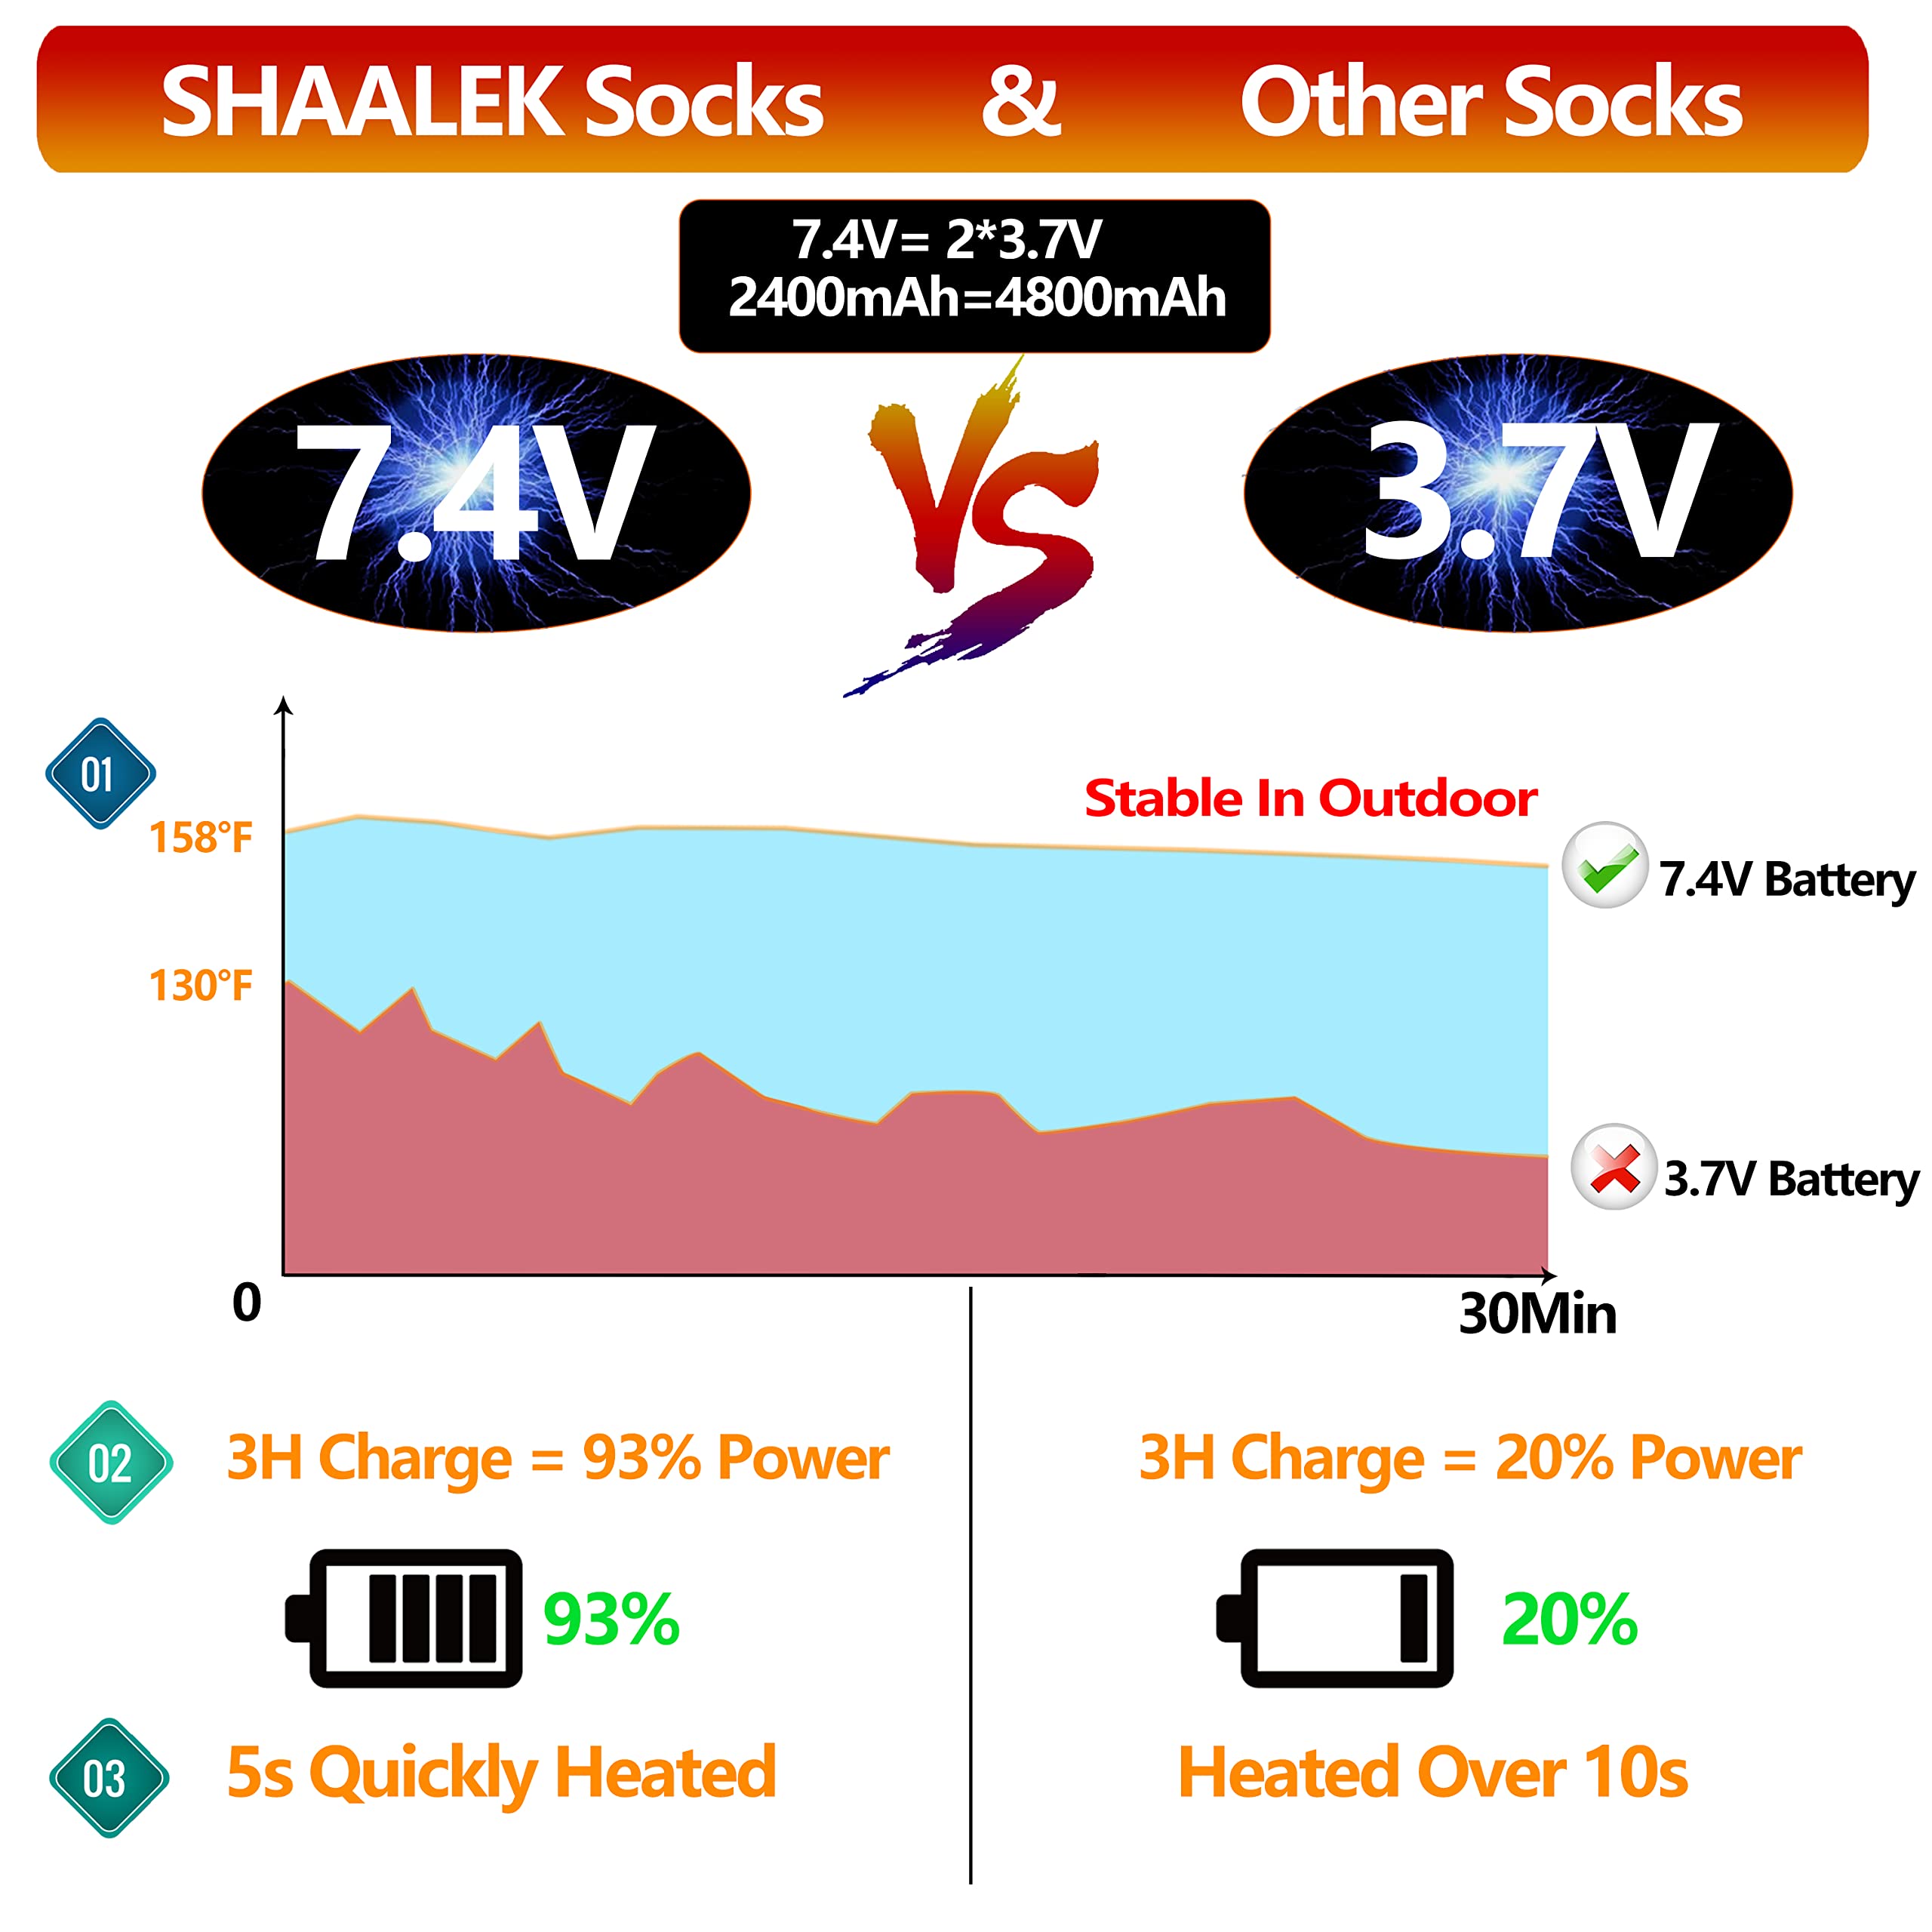 Heated Socks for Men Women - Electric Socks 7.4V Rechargeable for Winter Sport Hunting Skiing Motorcycle